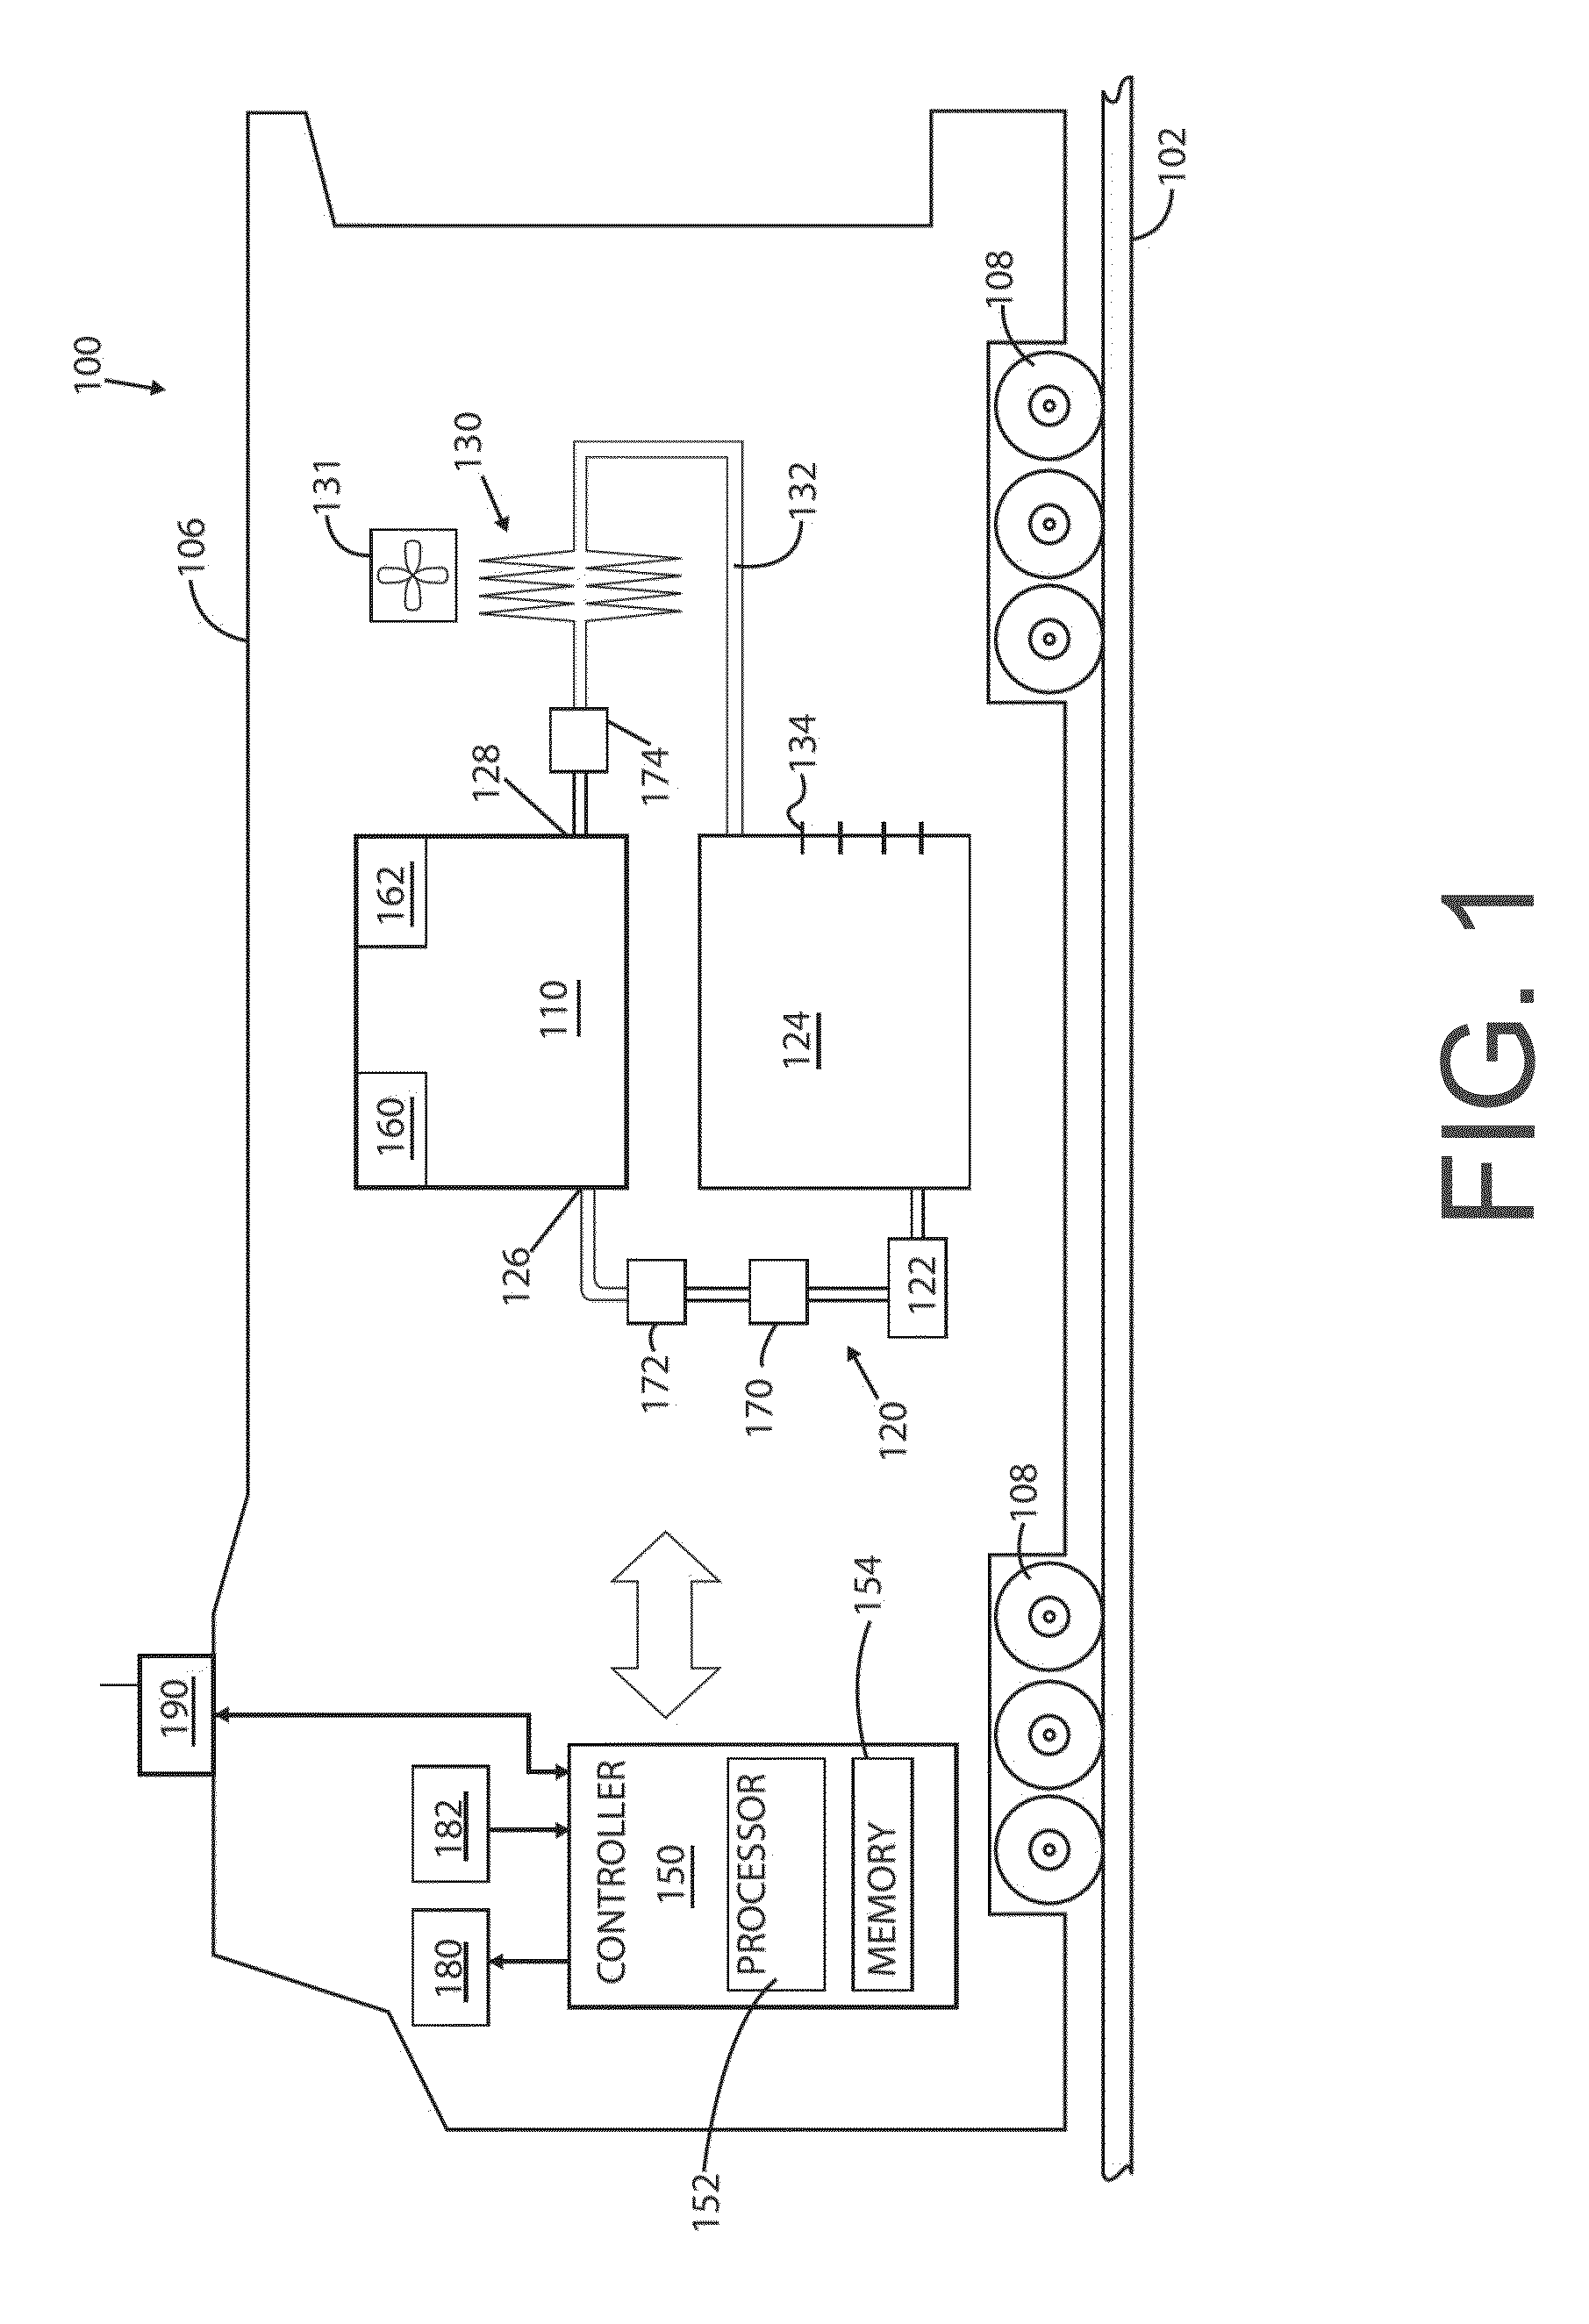 Systems and methods for diagnosing an engine